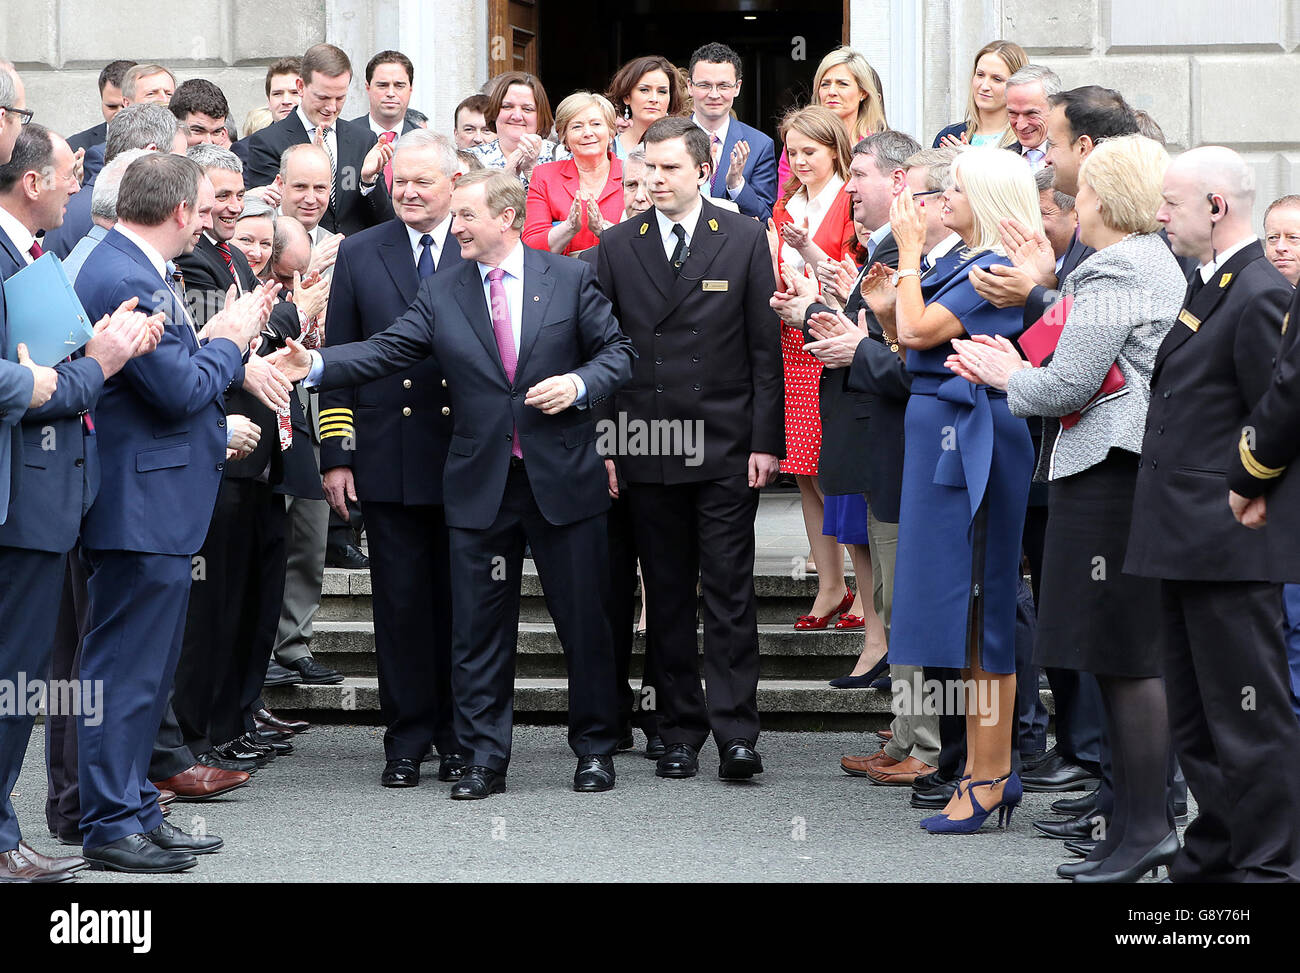 Newly elected Taoiseach Enda Kenny leaves Leinster House, Dublin, to go to Aras an Uachtarain to receive the Seal of the Taoiseach and Seal of Government. Stock Photo